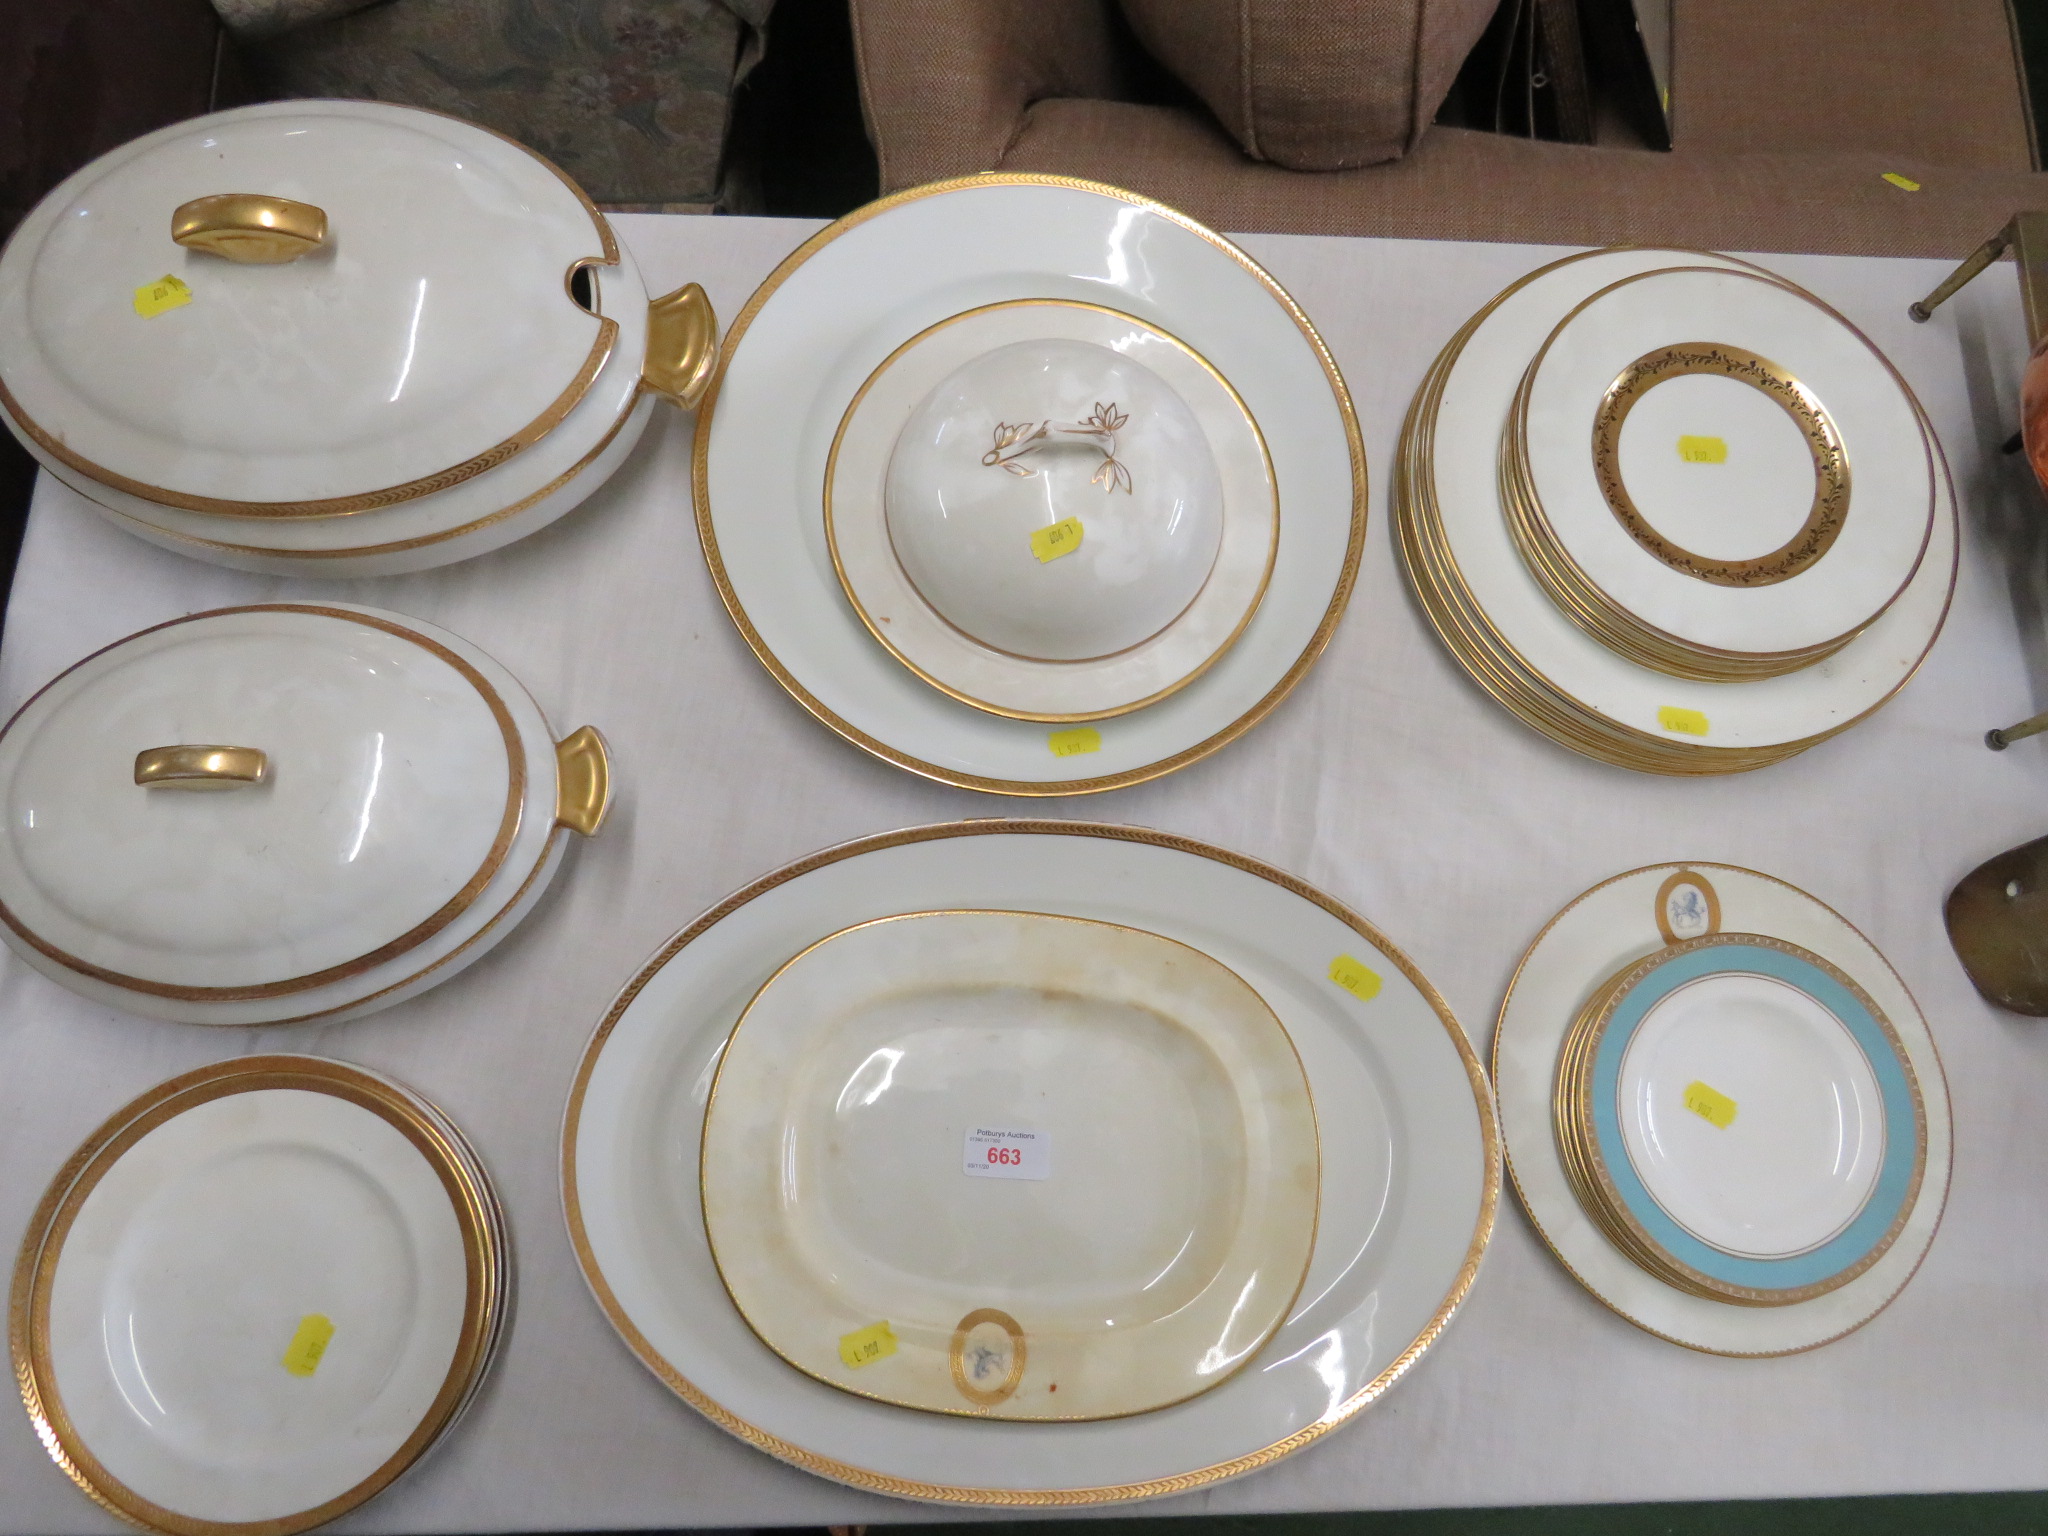 COALPORT CITATION DINNER AND TEA PLATES AND OTHER WHITE AND GILT DINING CHINA